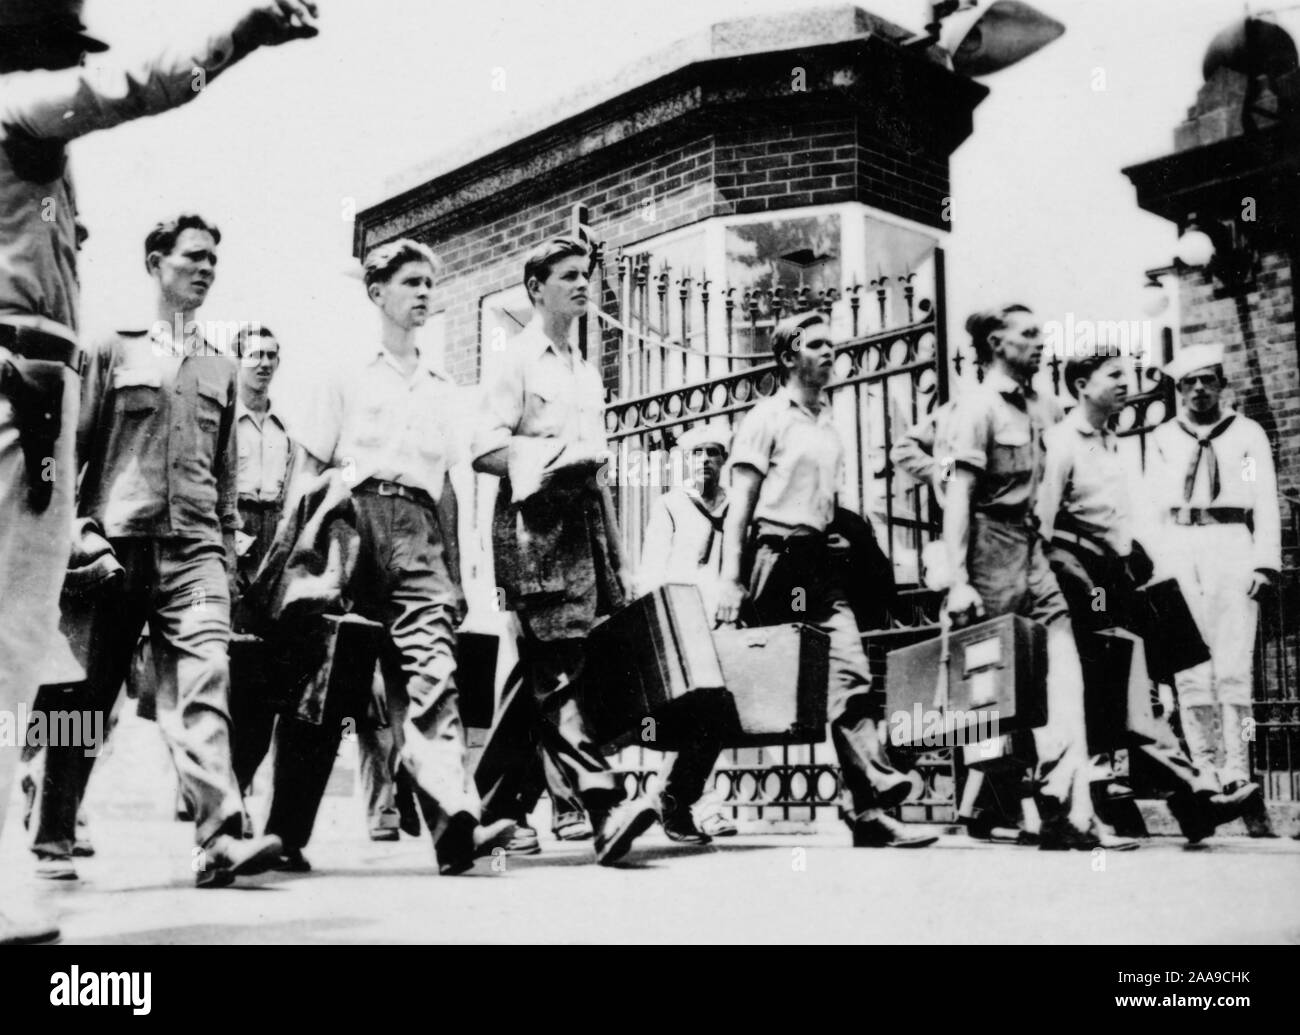 Navy recruits walk into the gates of Great Lakes Naval Training Station, ca. 1941. Stock Photo